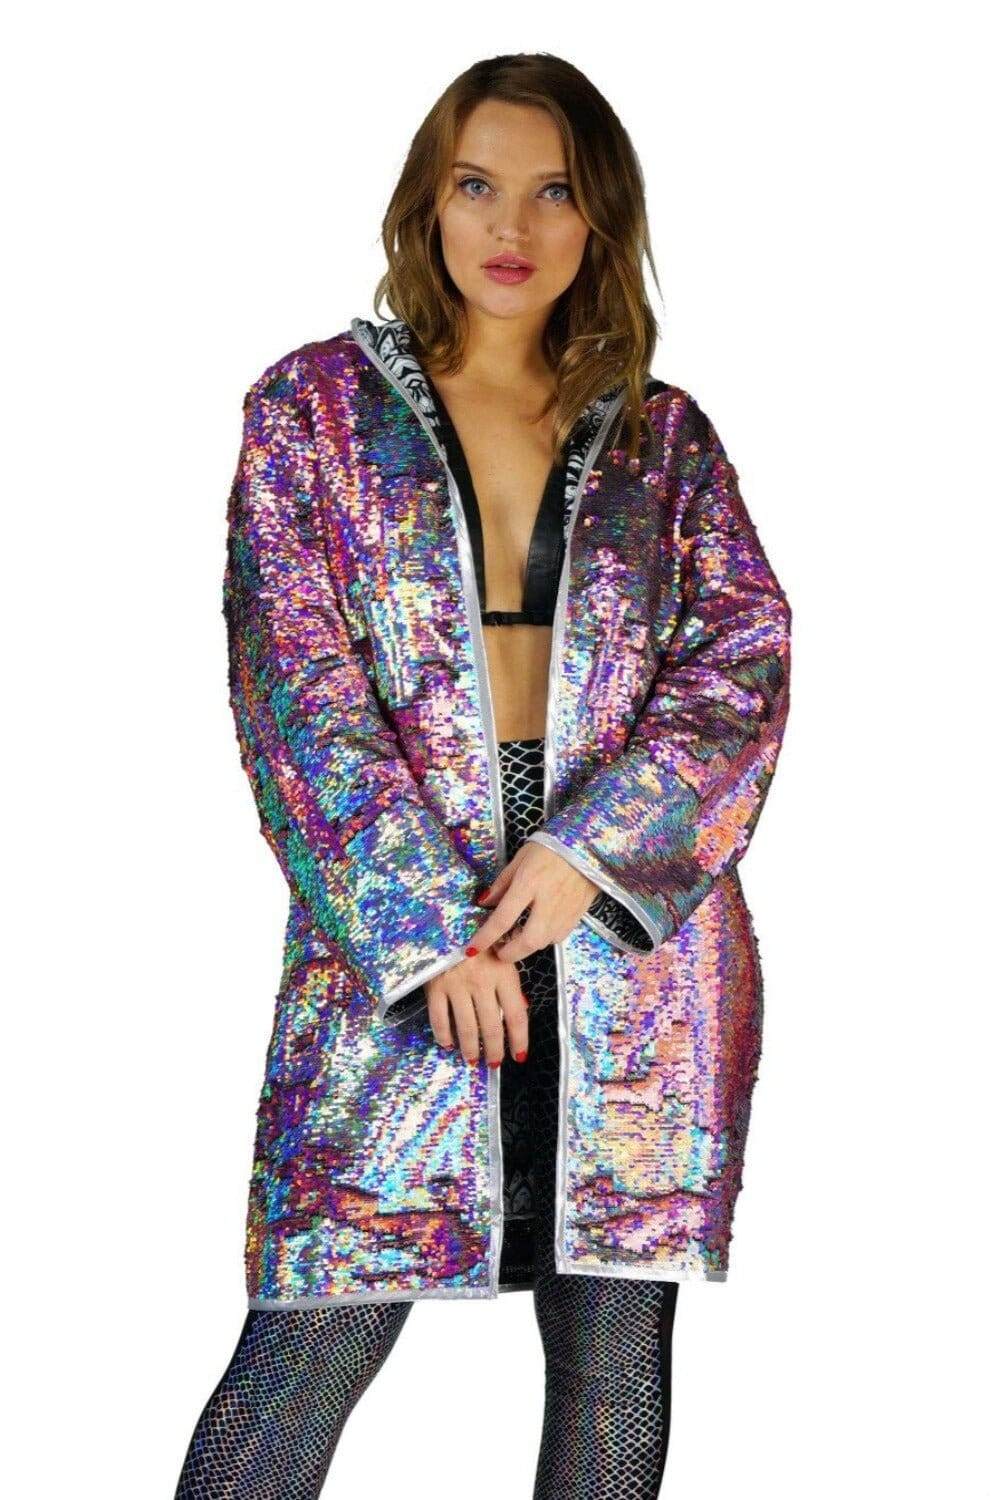 Holographic sequin hoodie jacket for women by Love Khaos